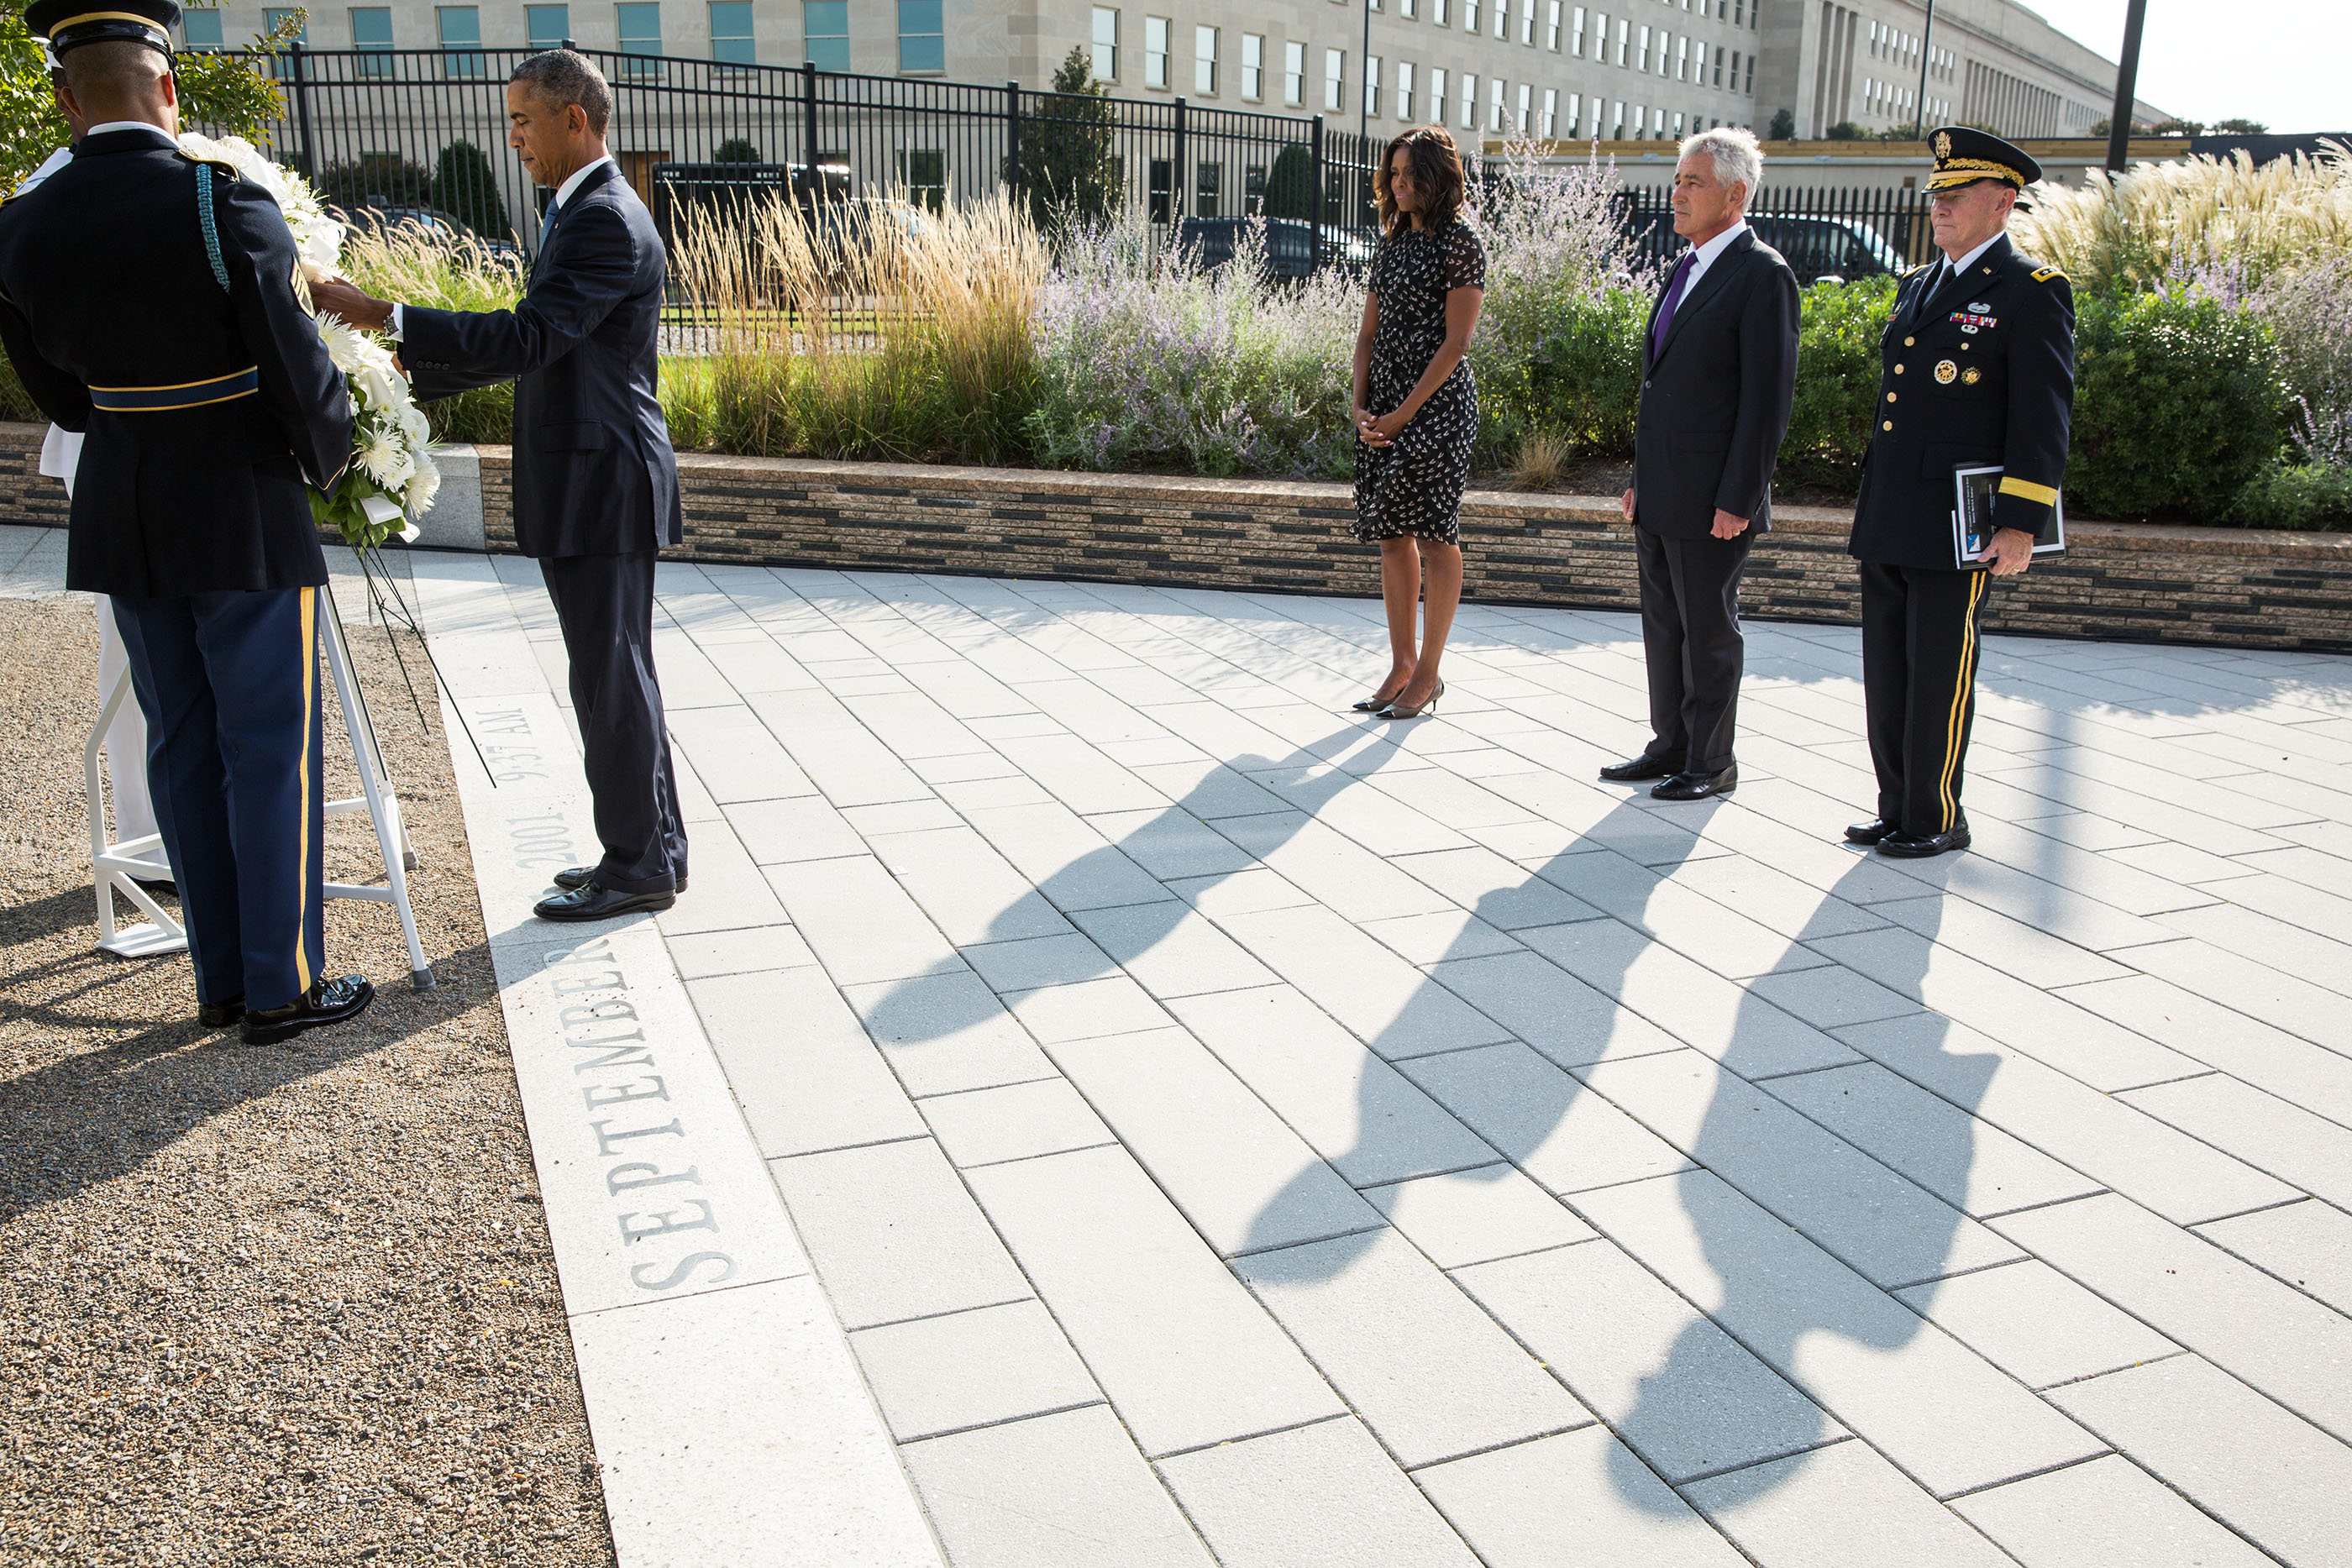 The President and First Lady participate in a wreath ceremony with Sec. Hagel, and Gen. Dempsey at the Pentagon Memorial in Arlington, Va., Sept. 11, 2014. (Official White House Photo by Pete Souza)